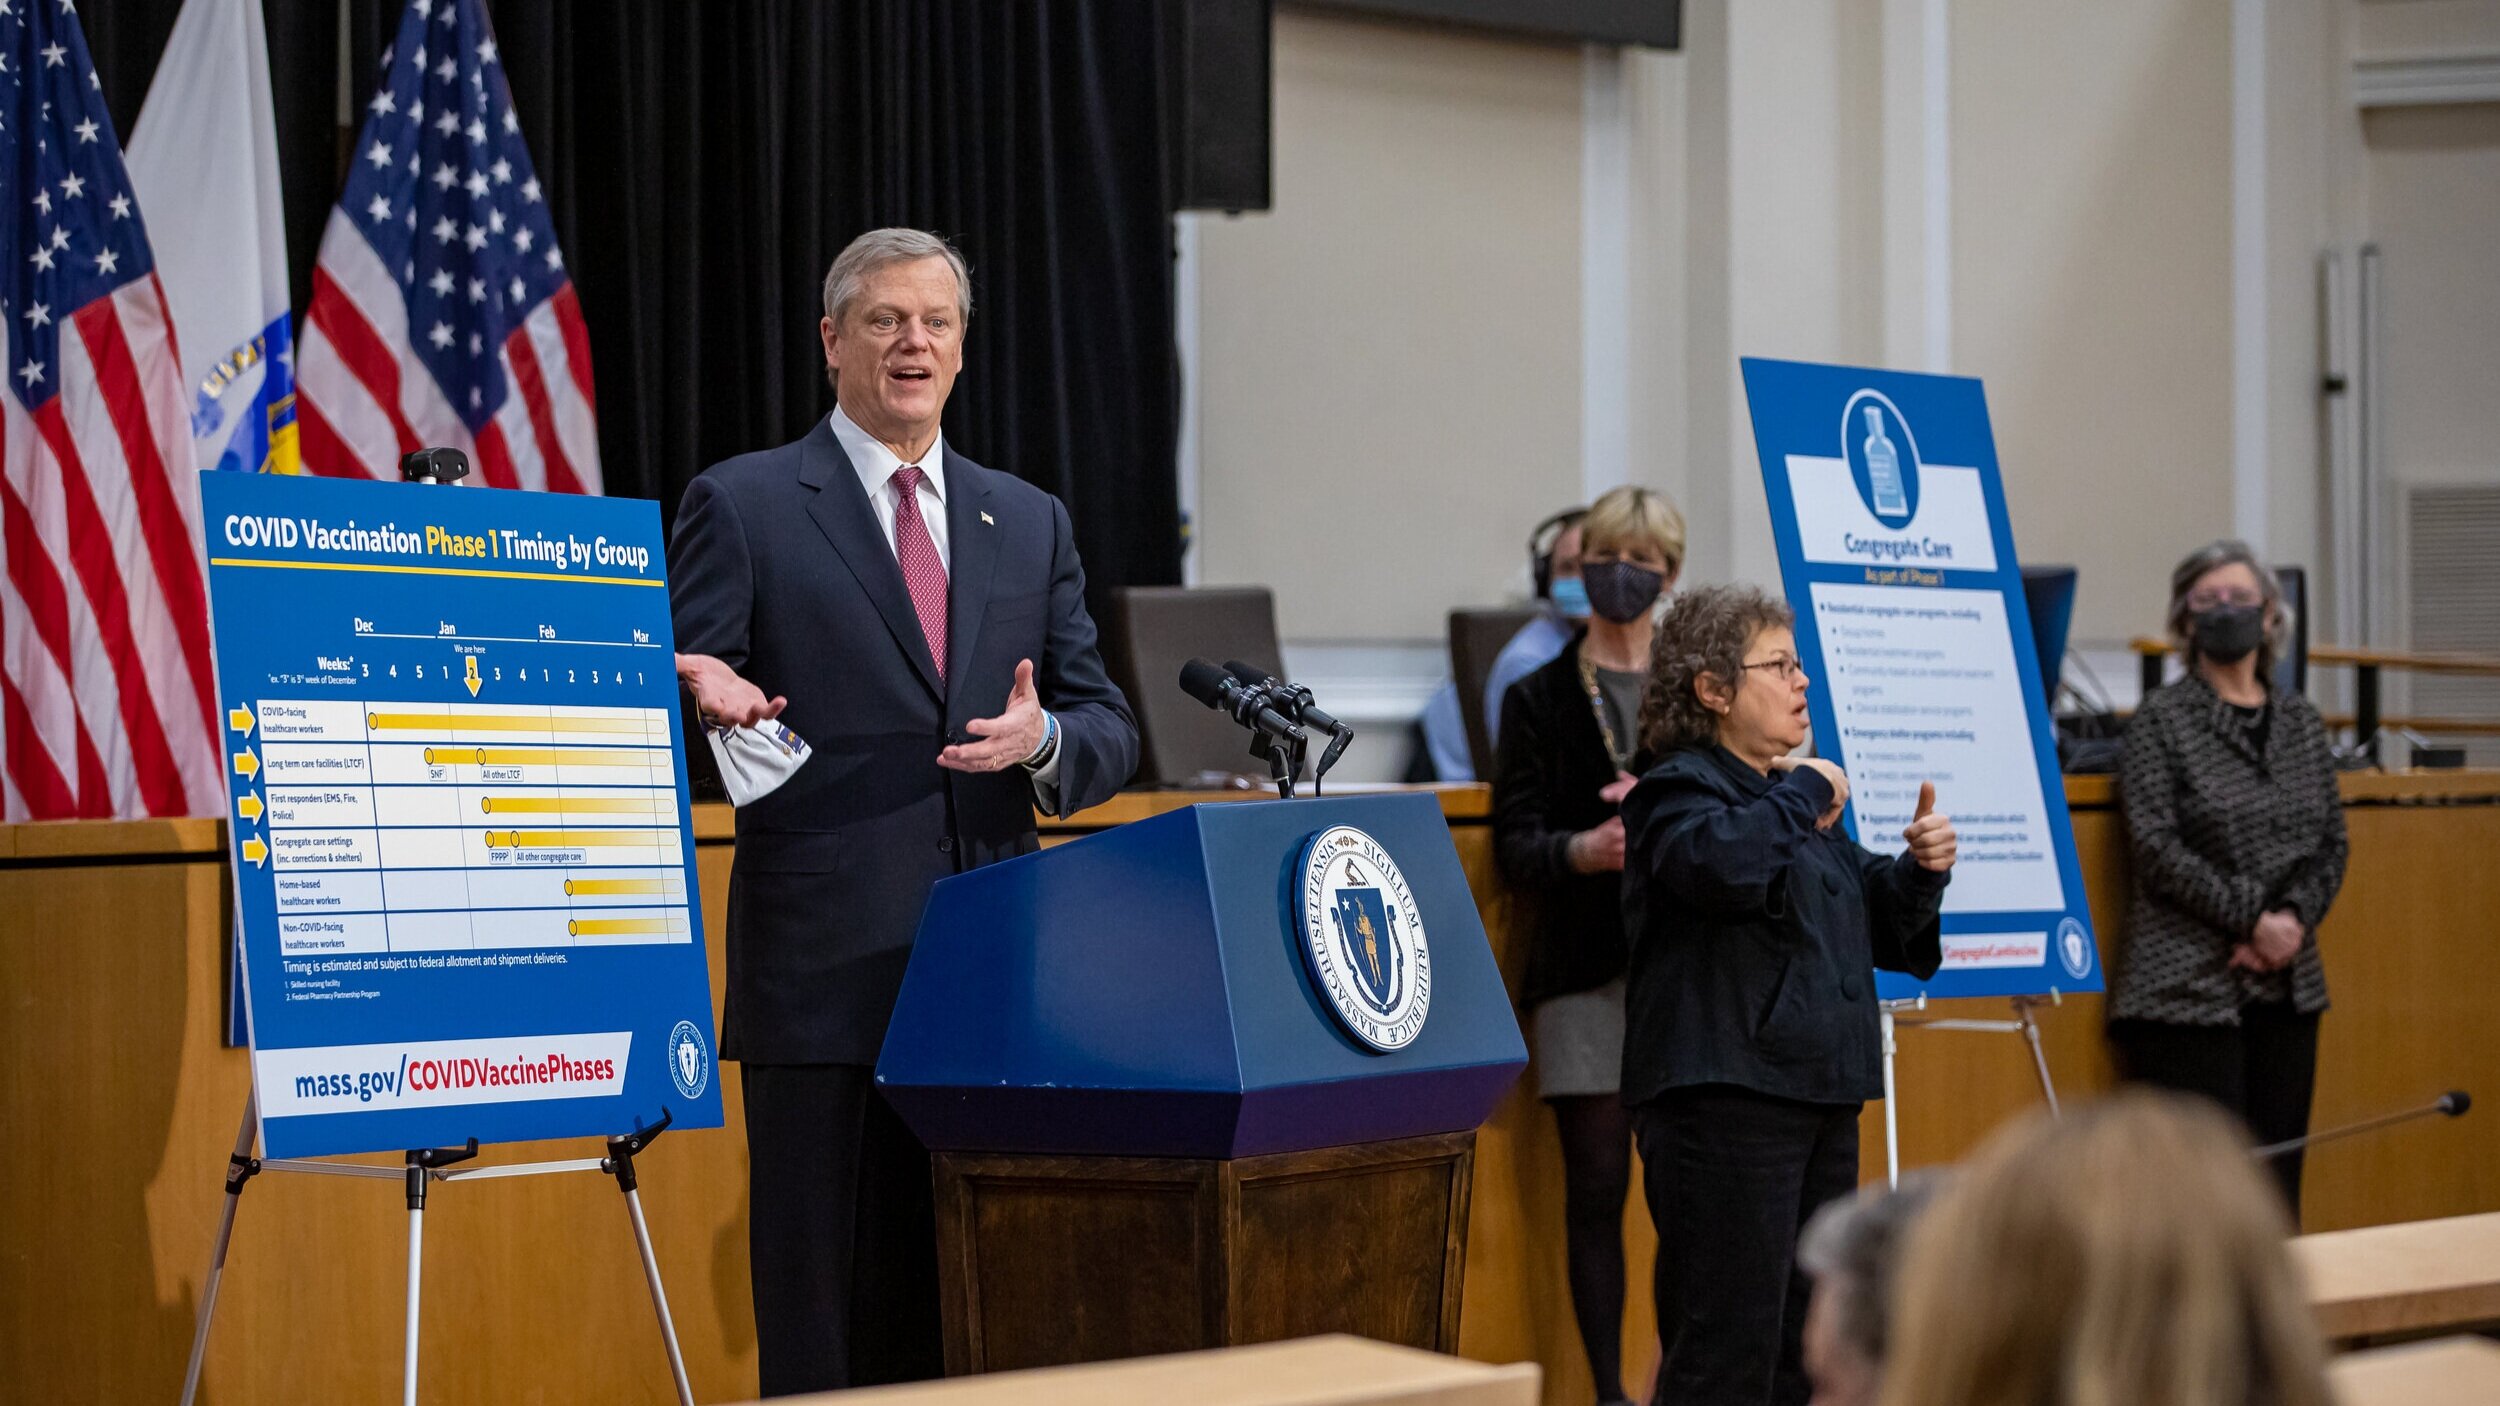 Governor Baker's Press Conference - Jan 13, 2021 - Posters